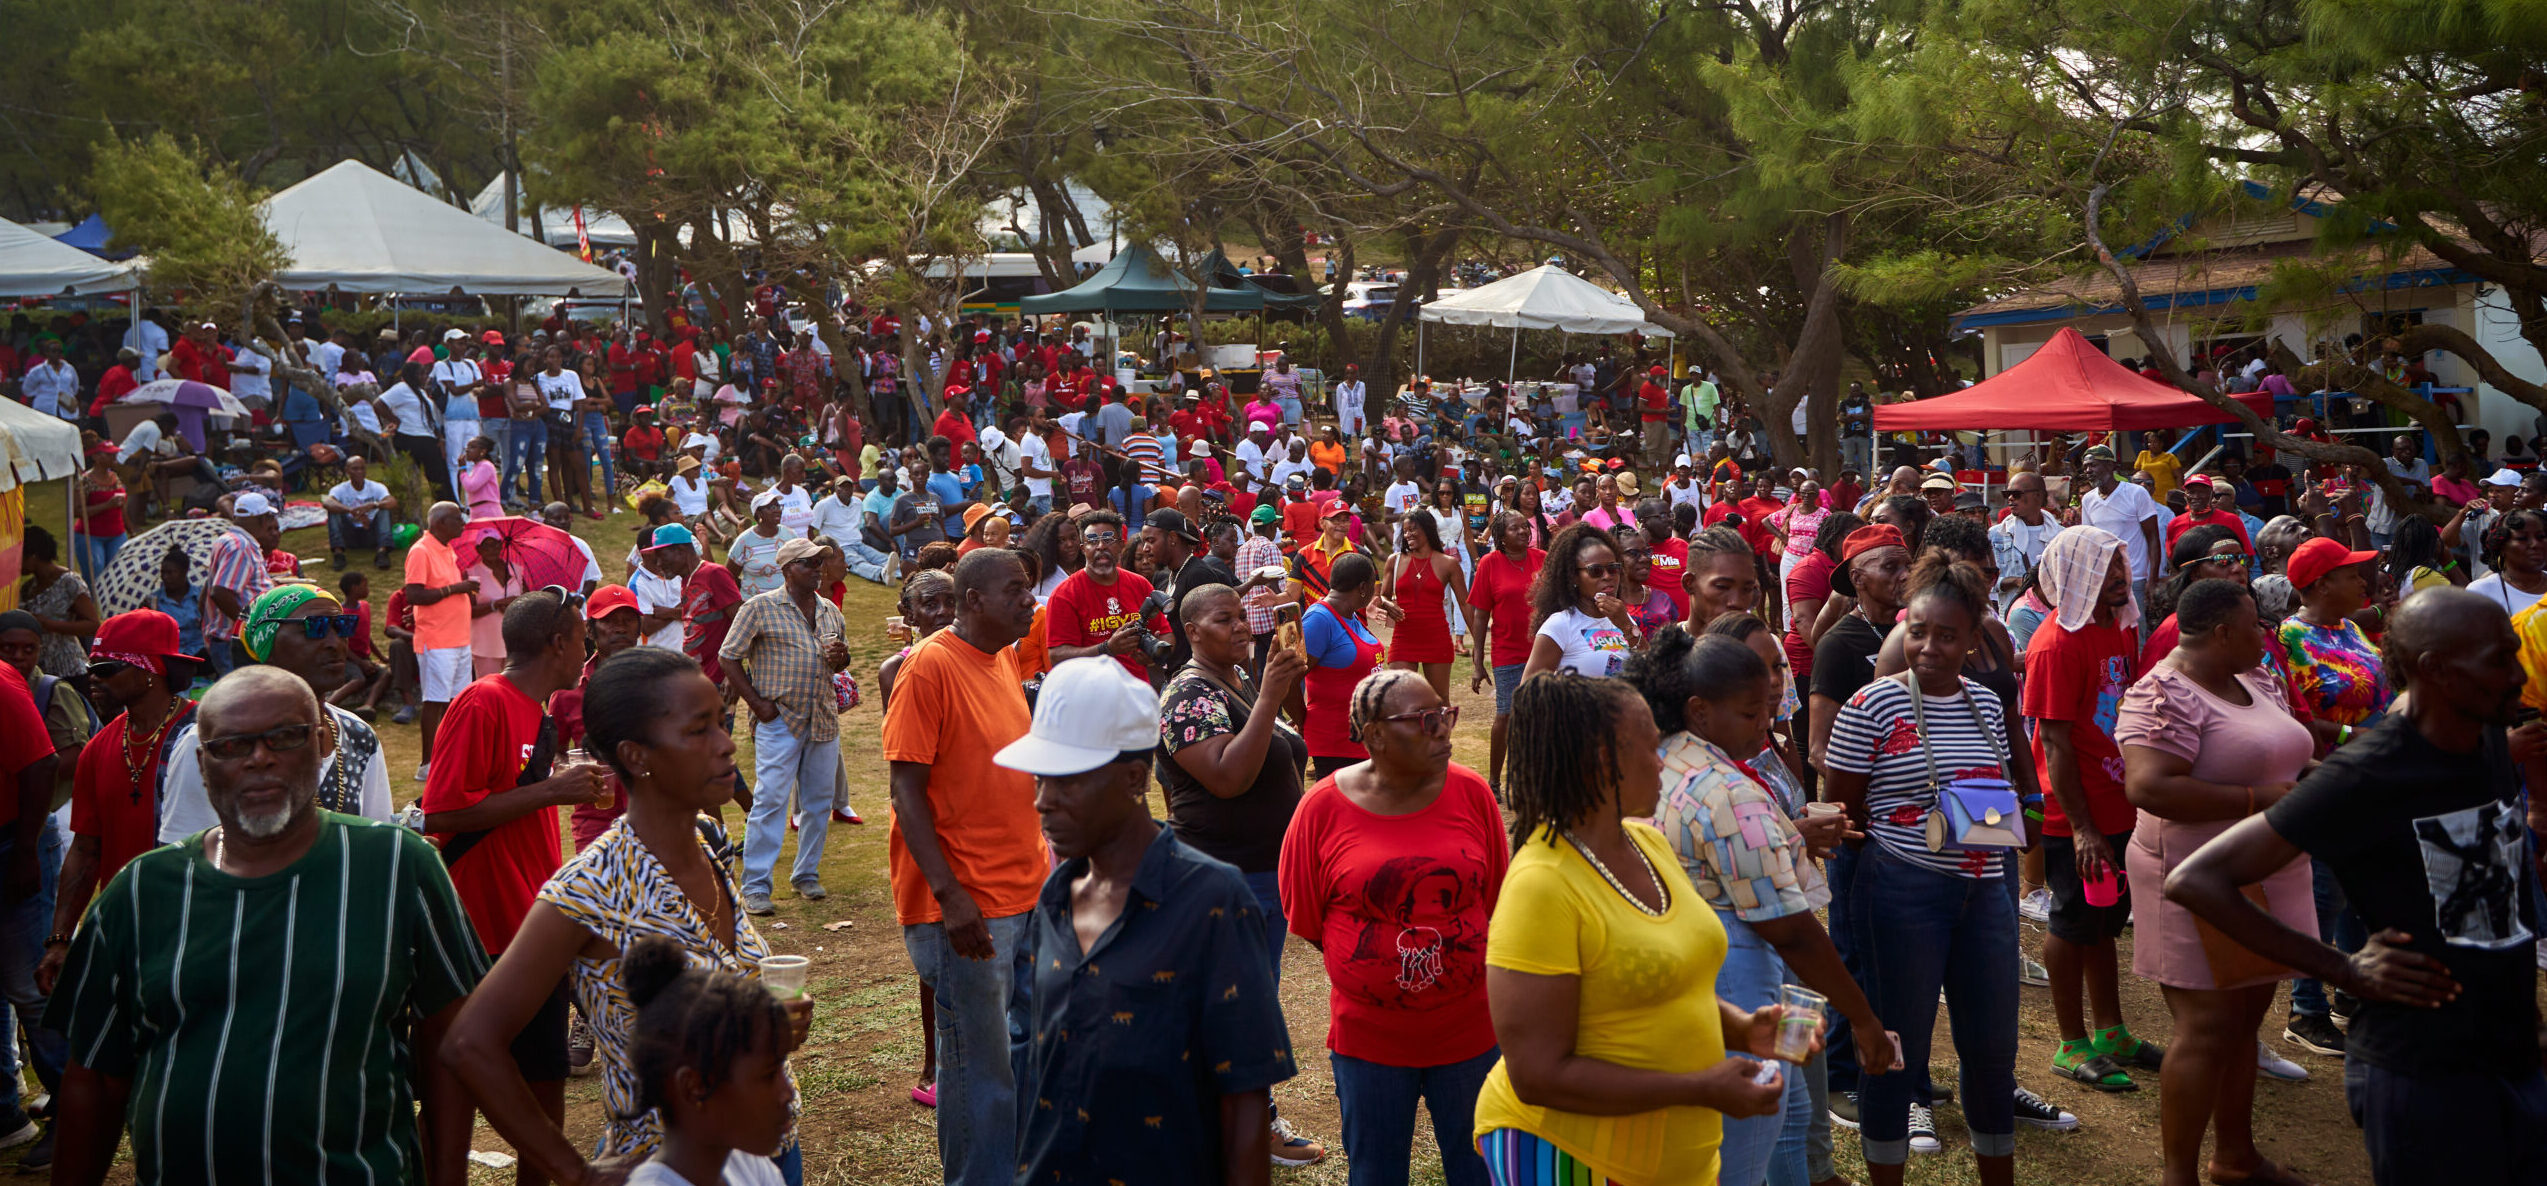 blp-supporters-urged-to-strive-for-excellence